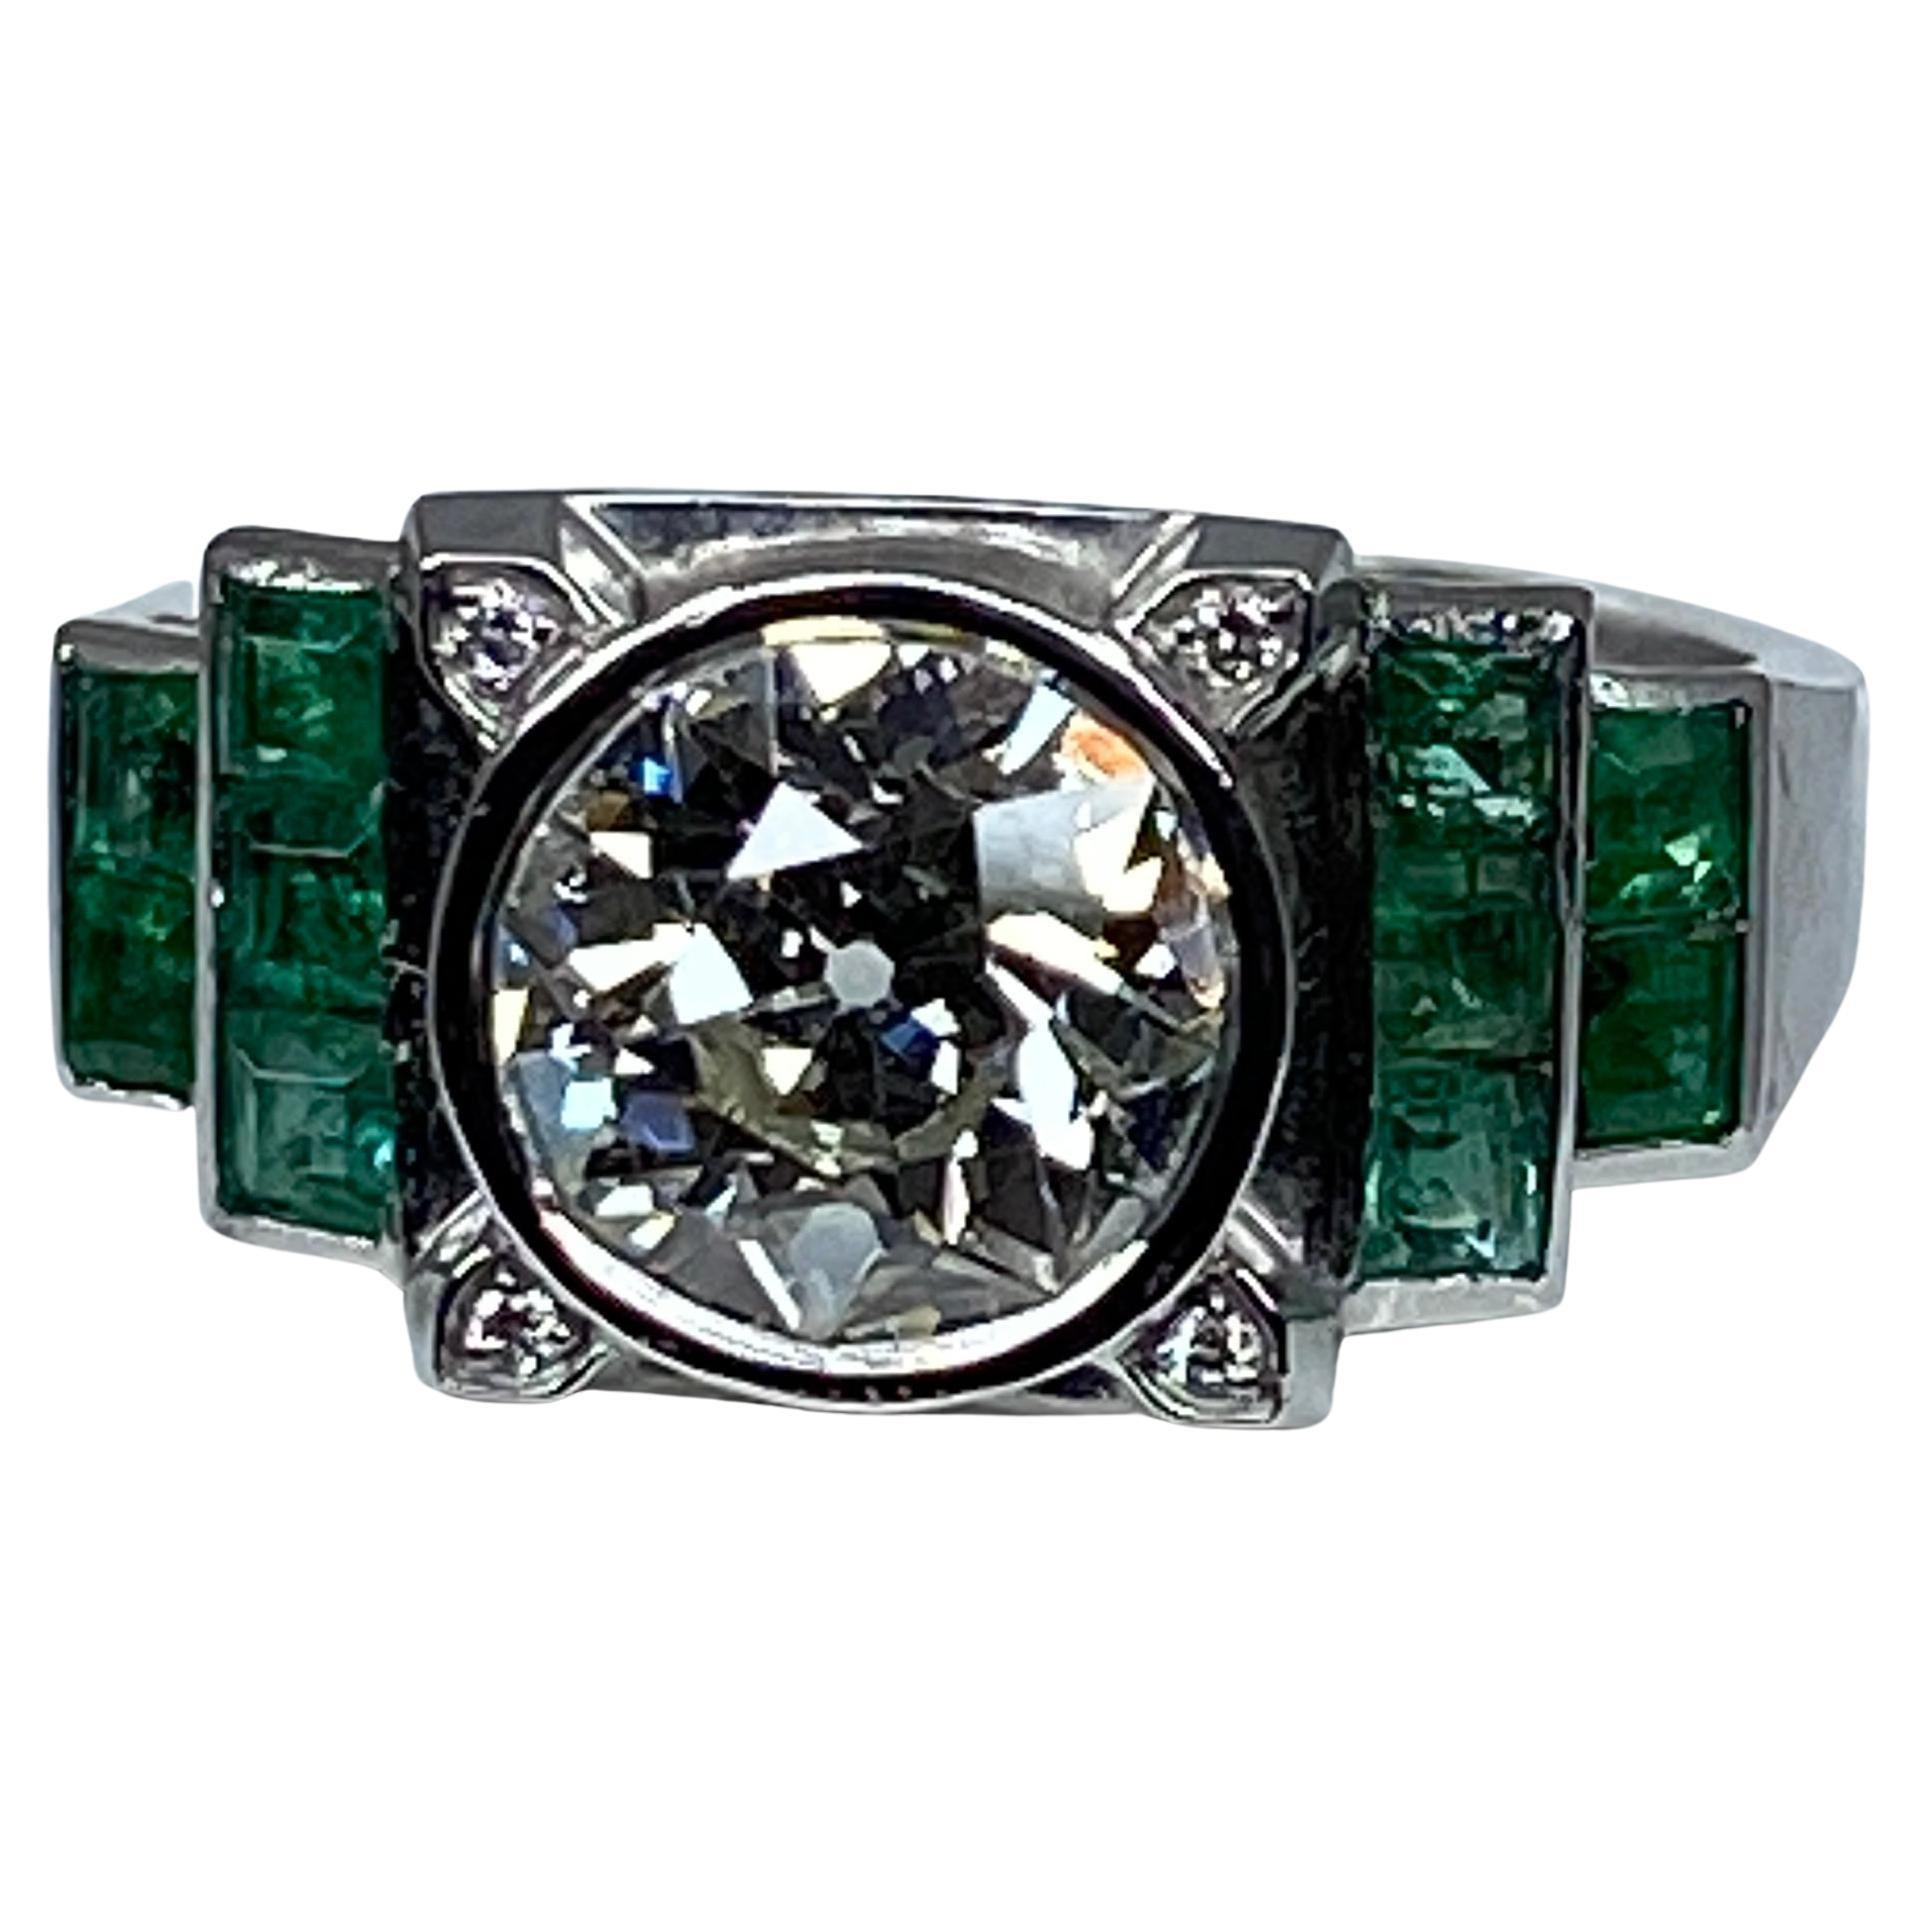 Platinium Engagement Ring Set with a 1.55 Carat Diamond Backed by Emeralds, 1900